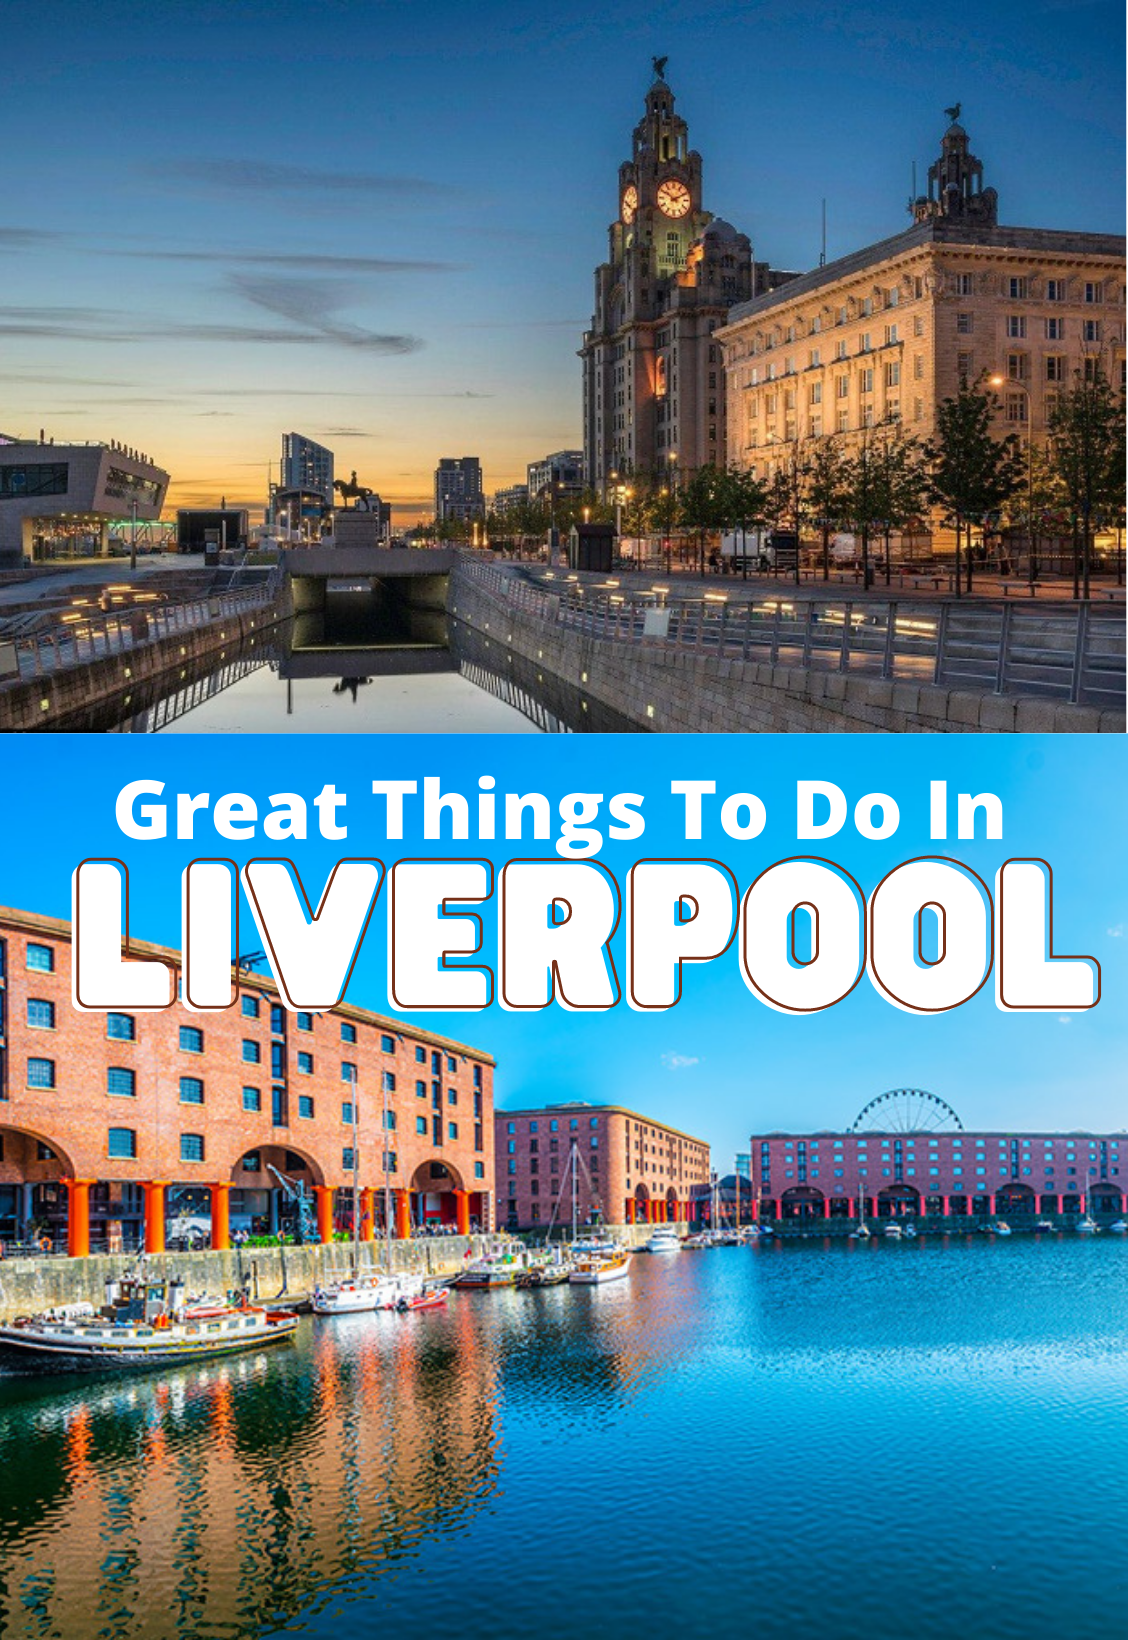 Great things to do in Liverpool, UK